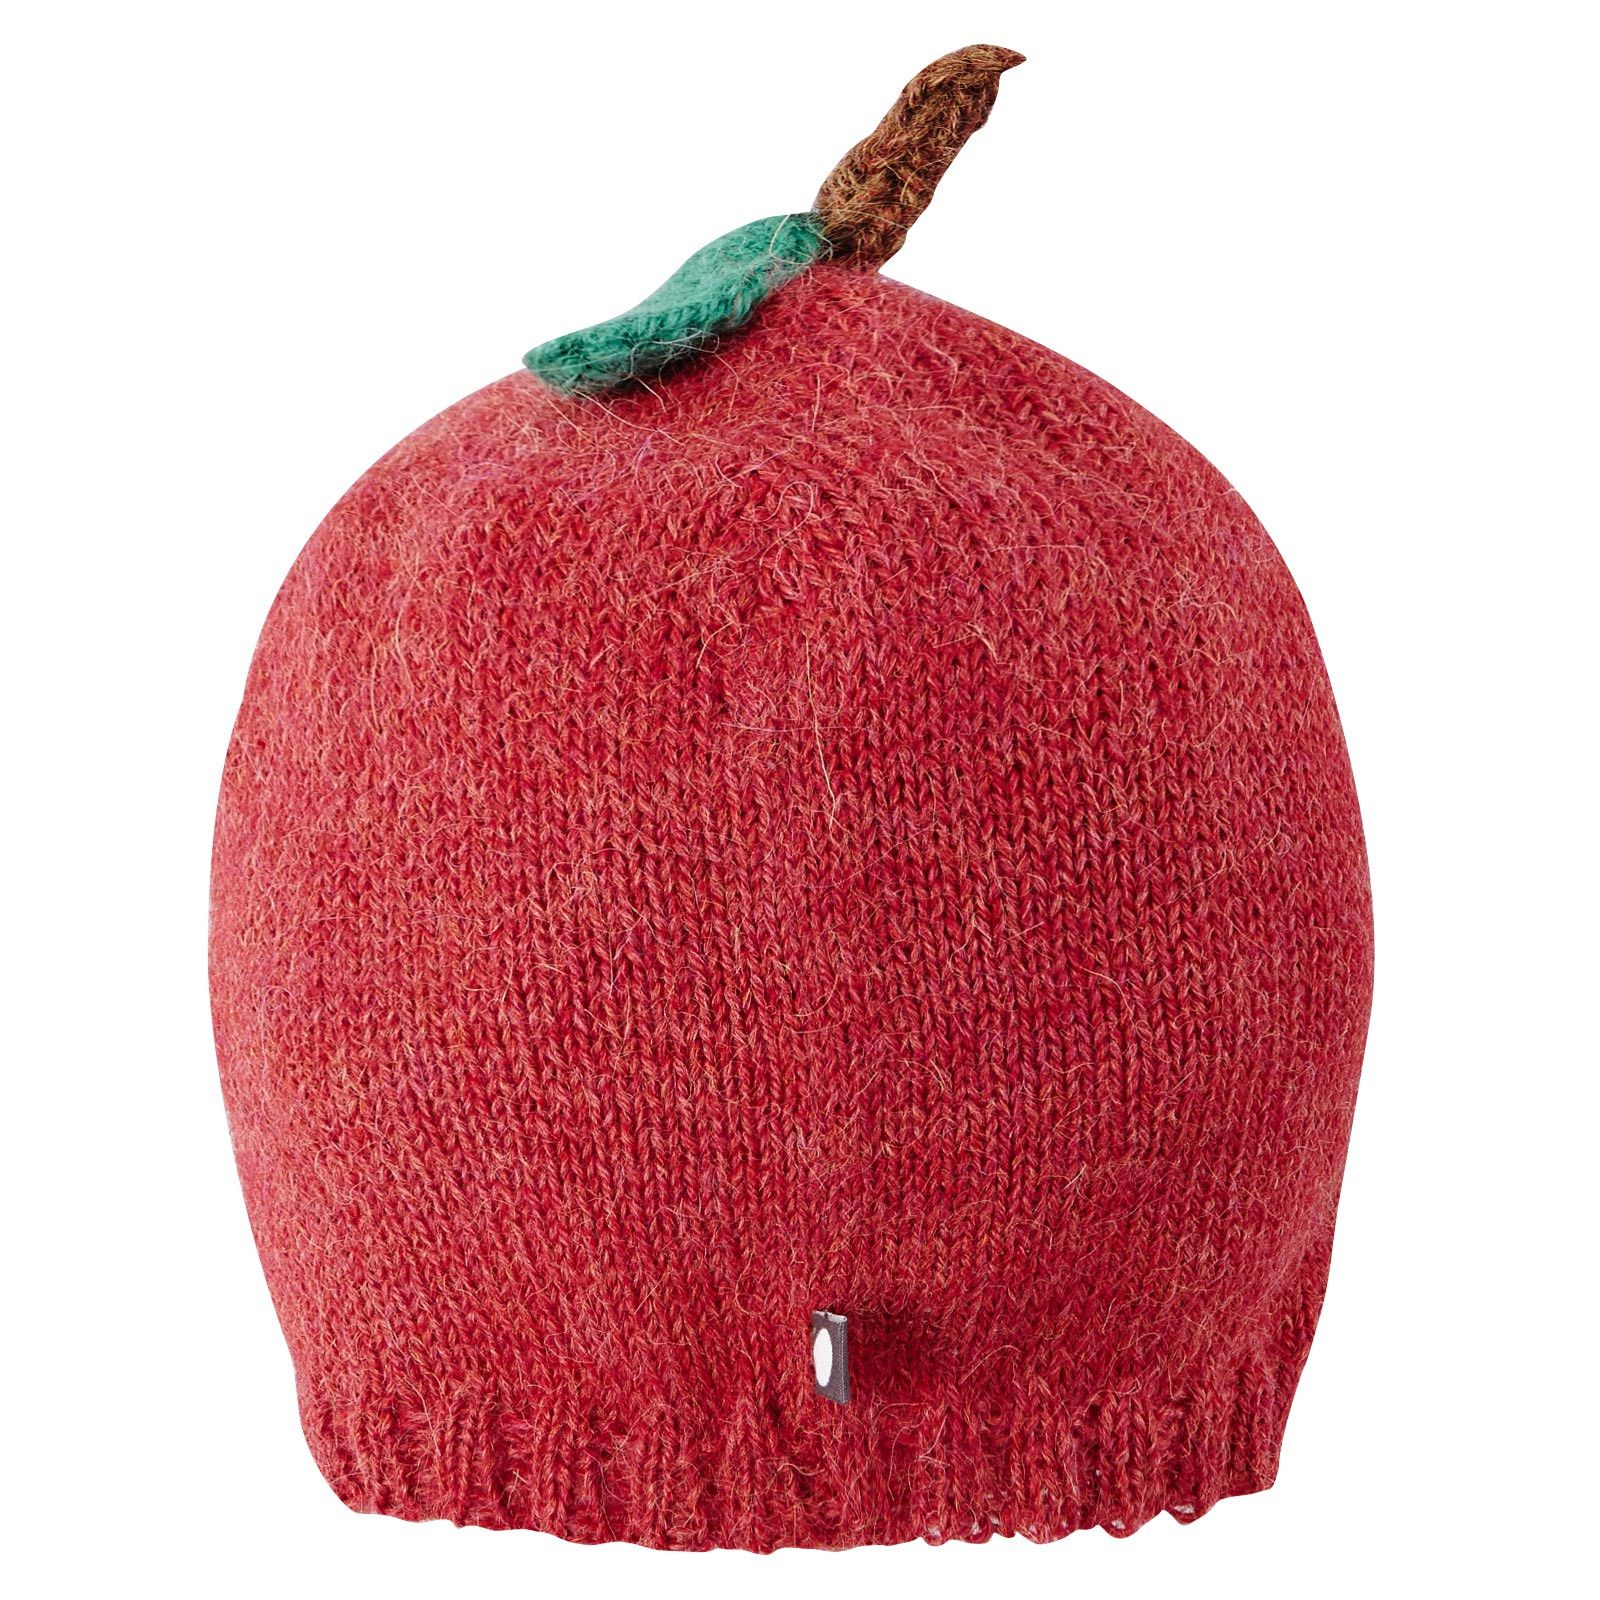 Baby Red Alpaca Wool Knitted Apple Trims Hat - CÉMAROSE | Children's Fashion Store - 2